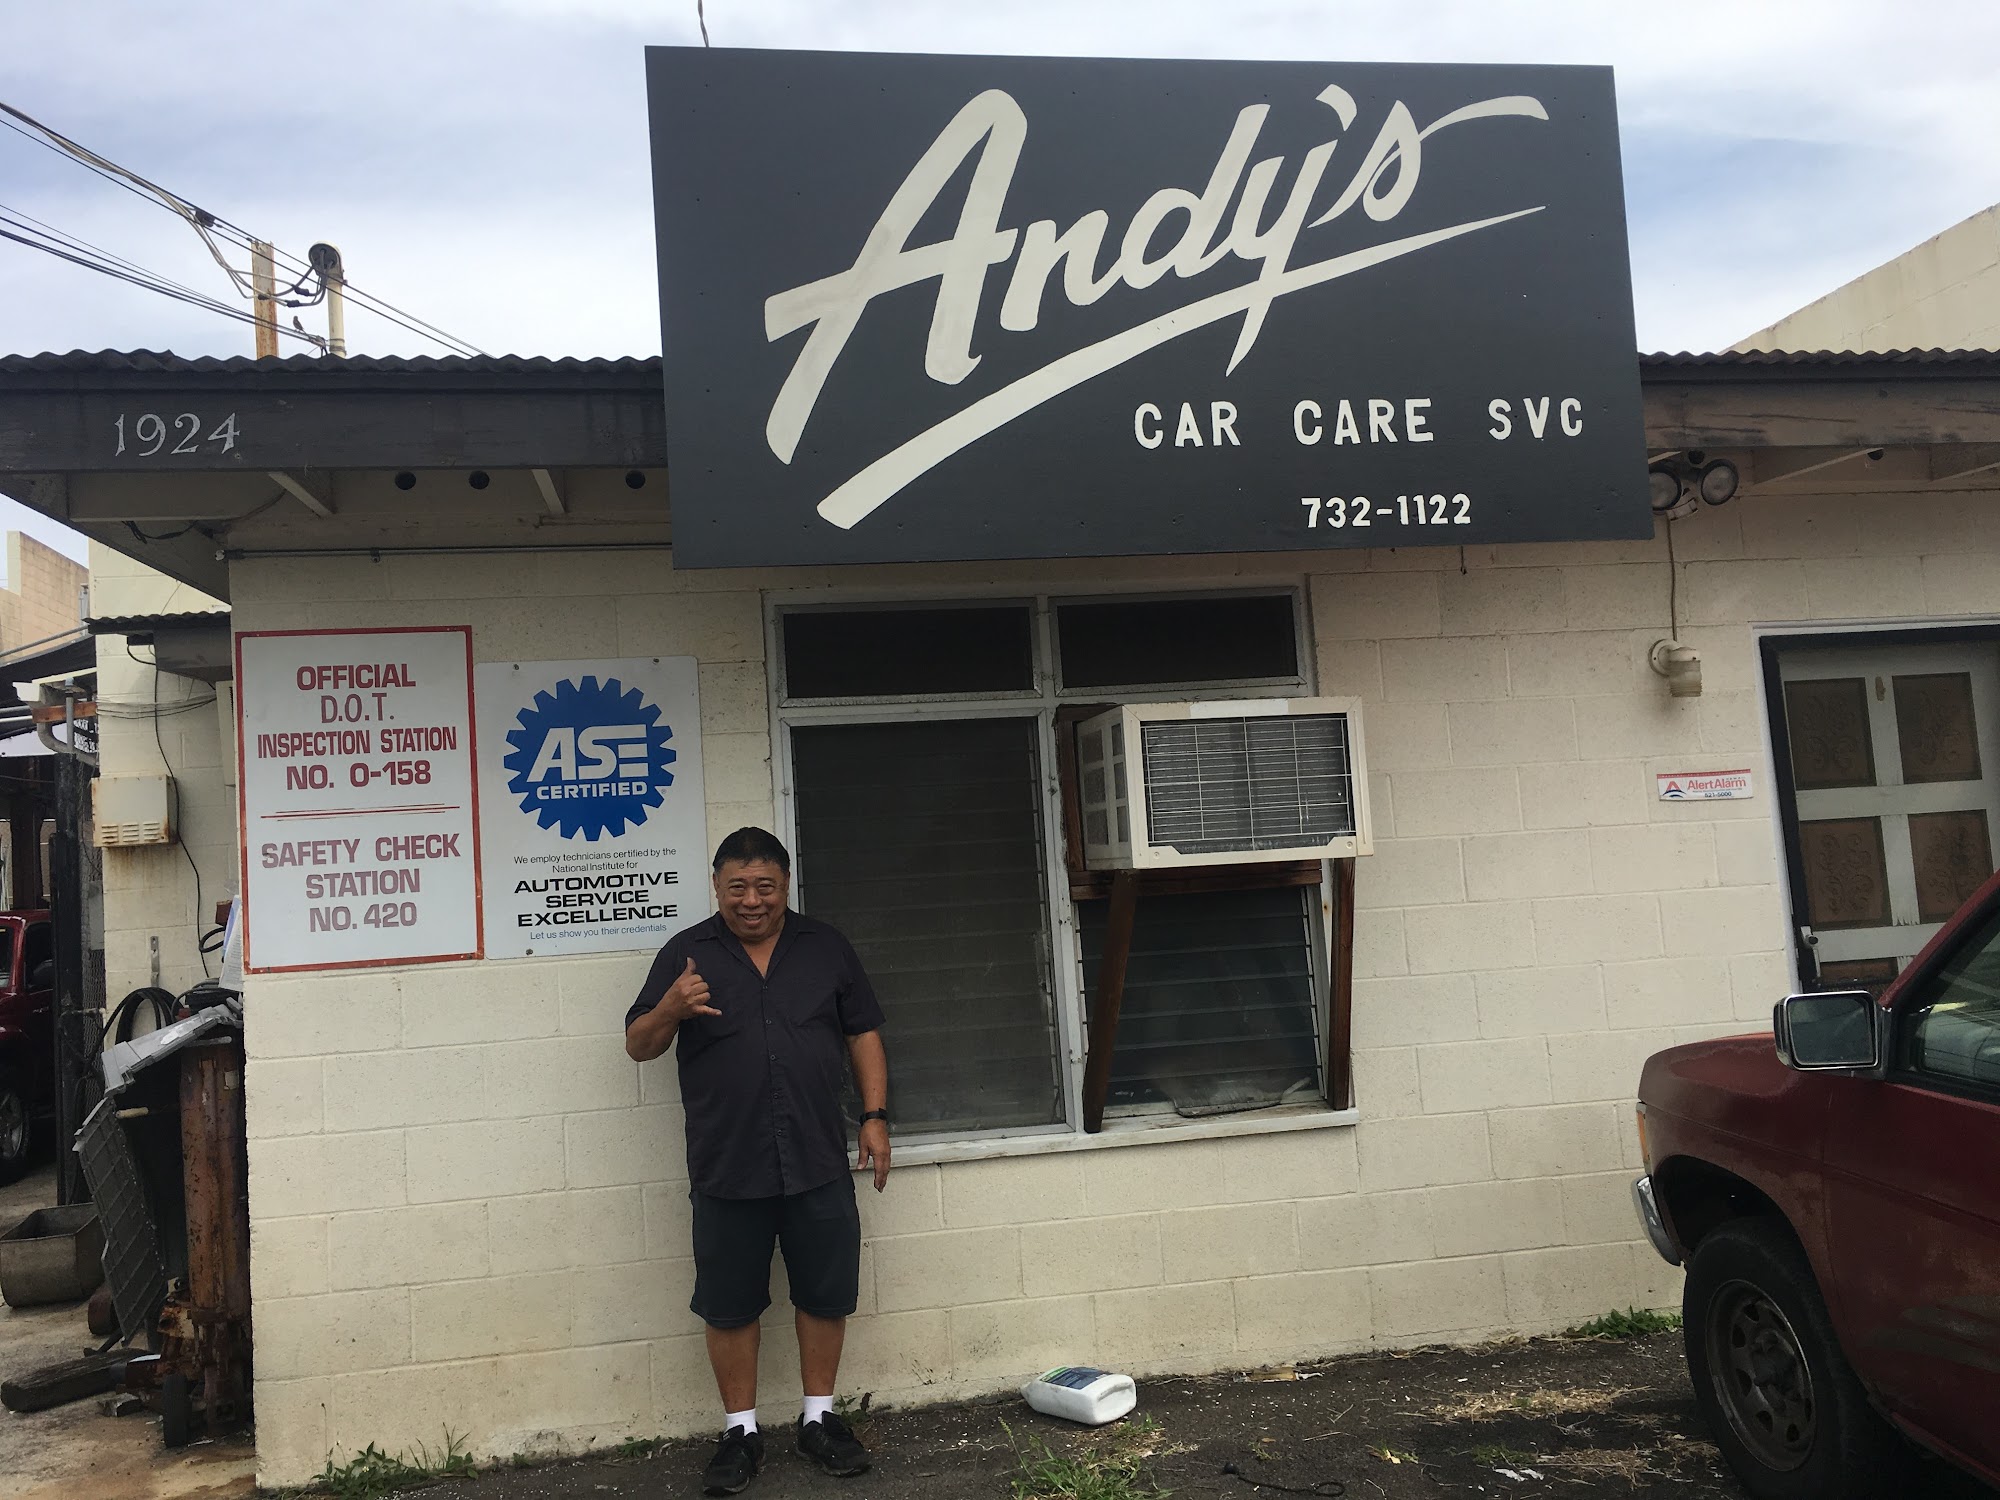 Andy's Car Care Service